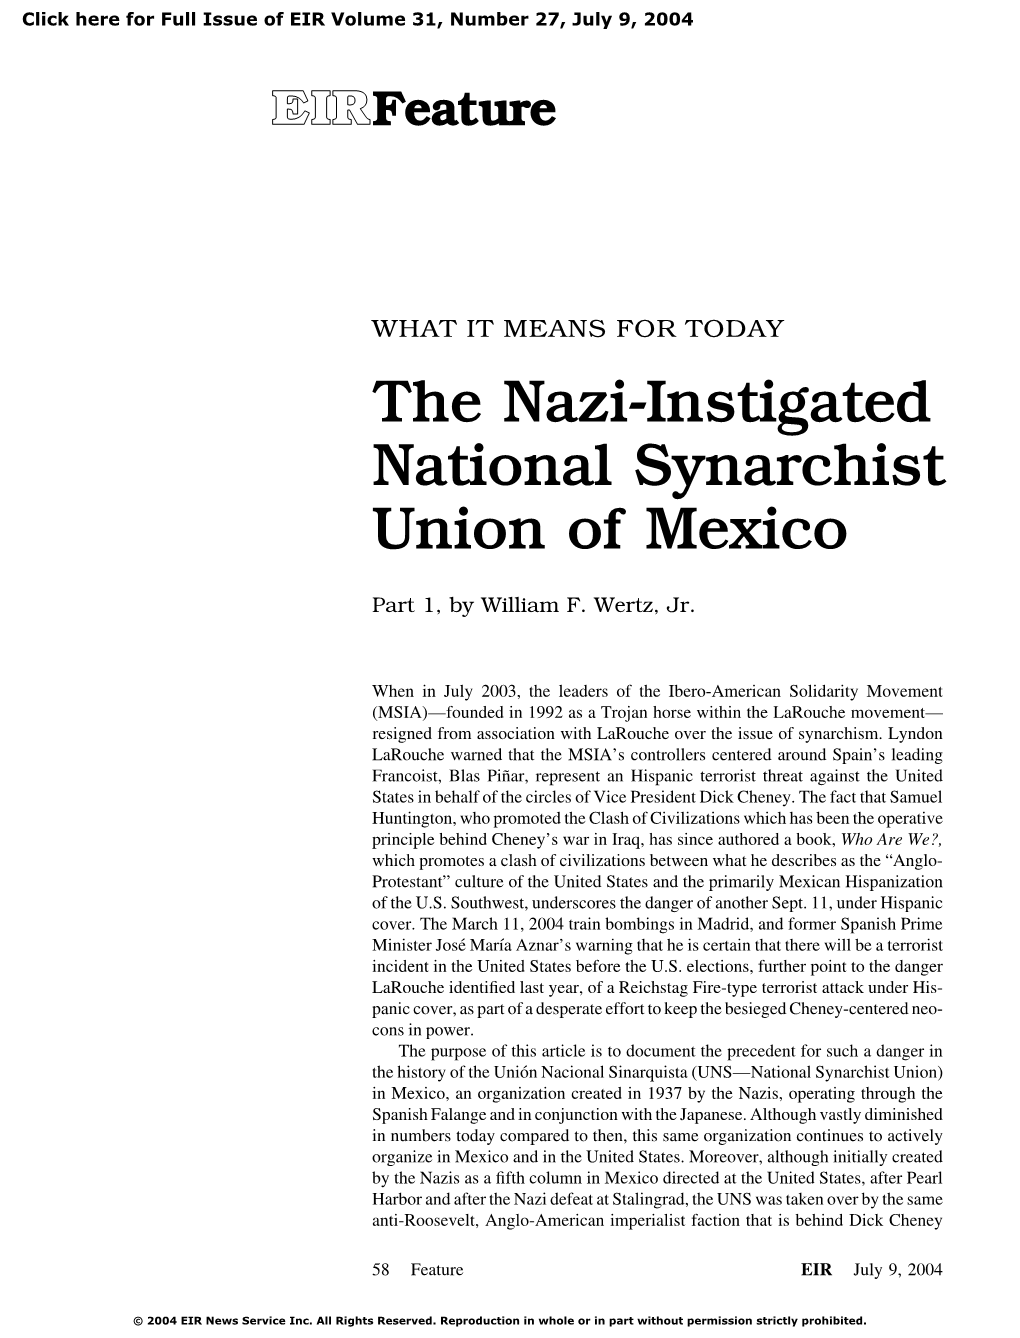 The Nazi-Instigated National Synarchist Union of Mexico